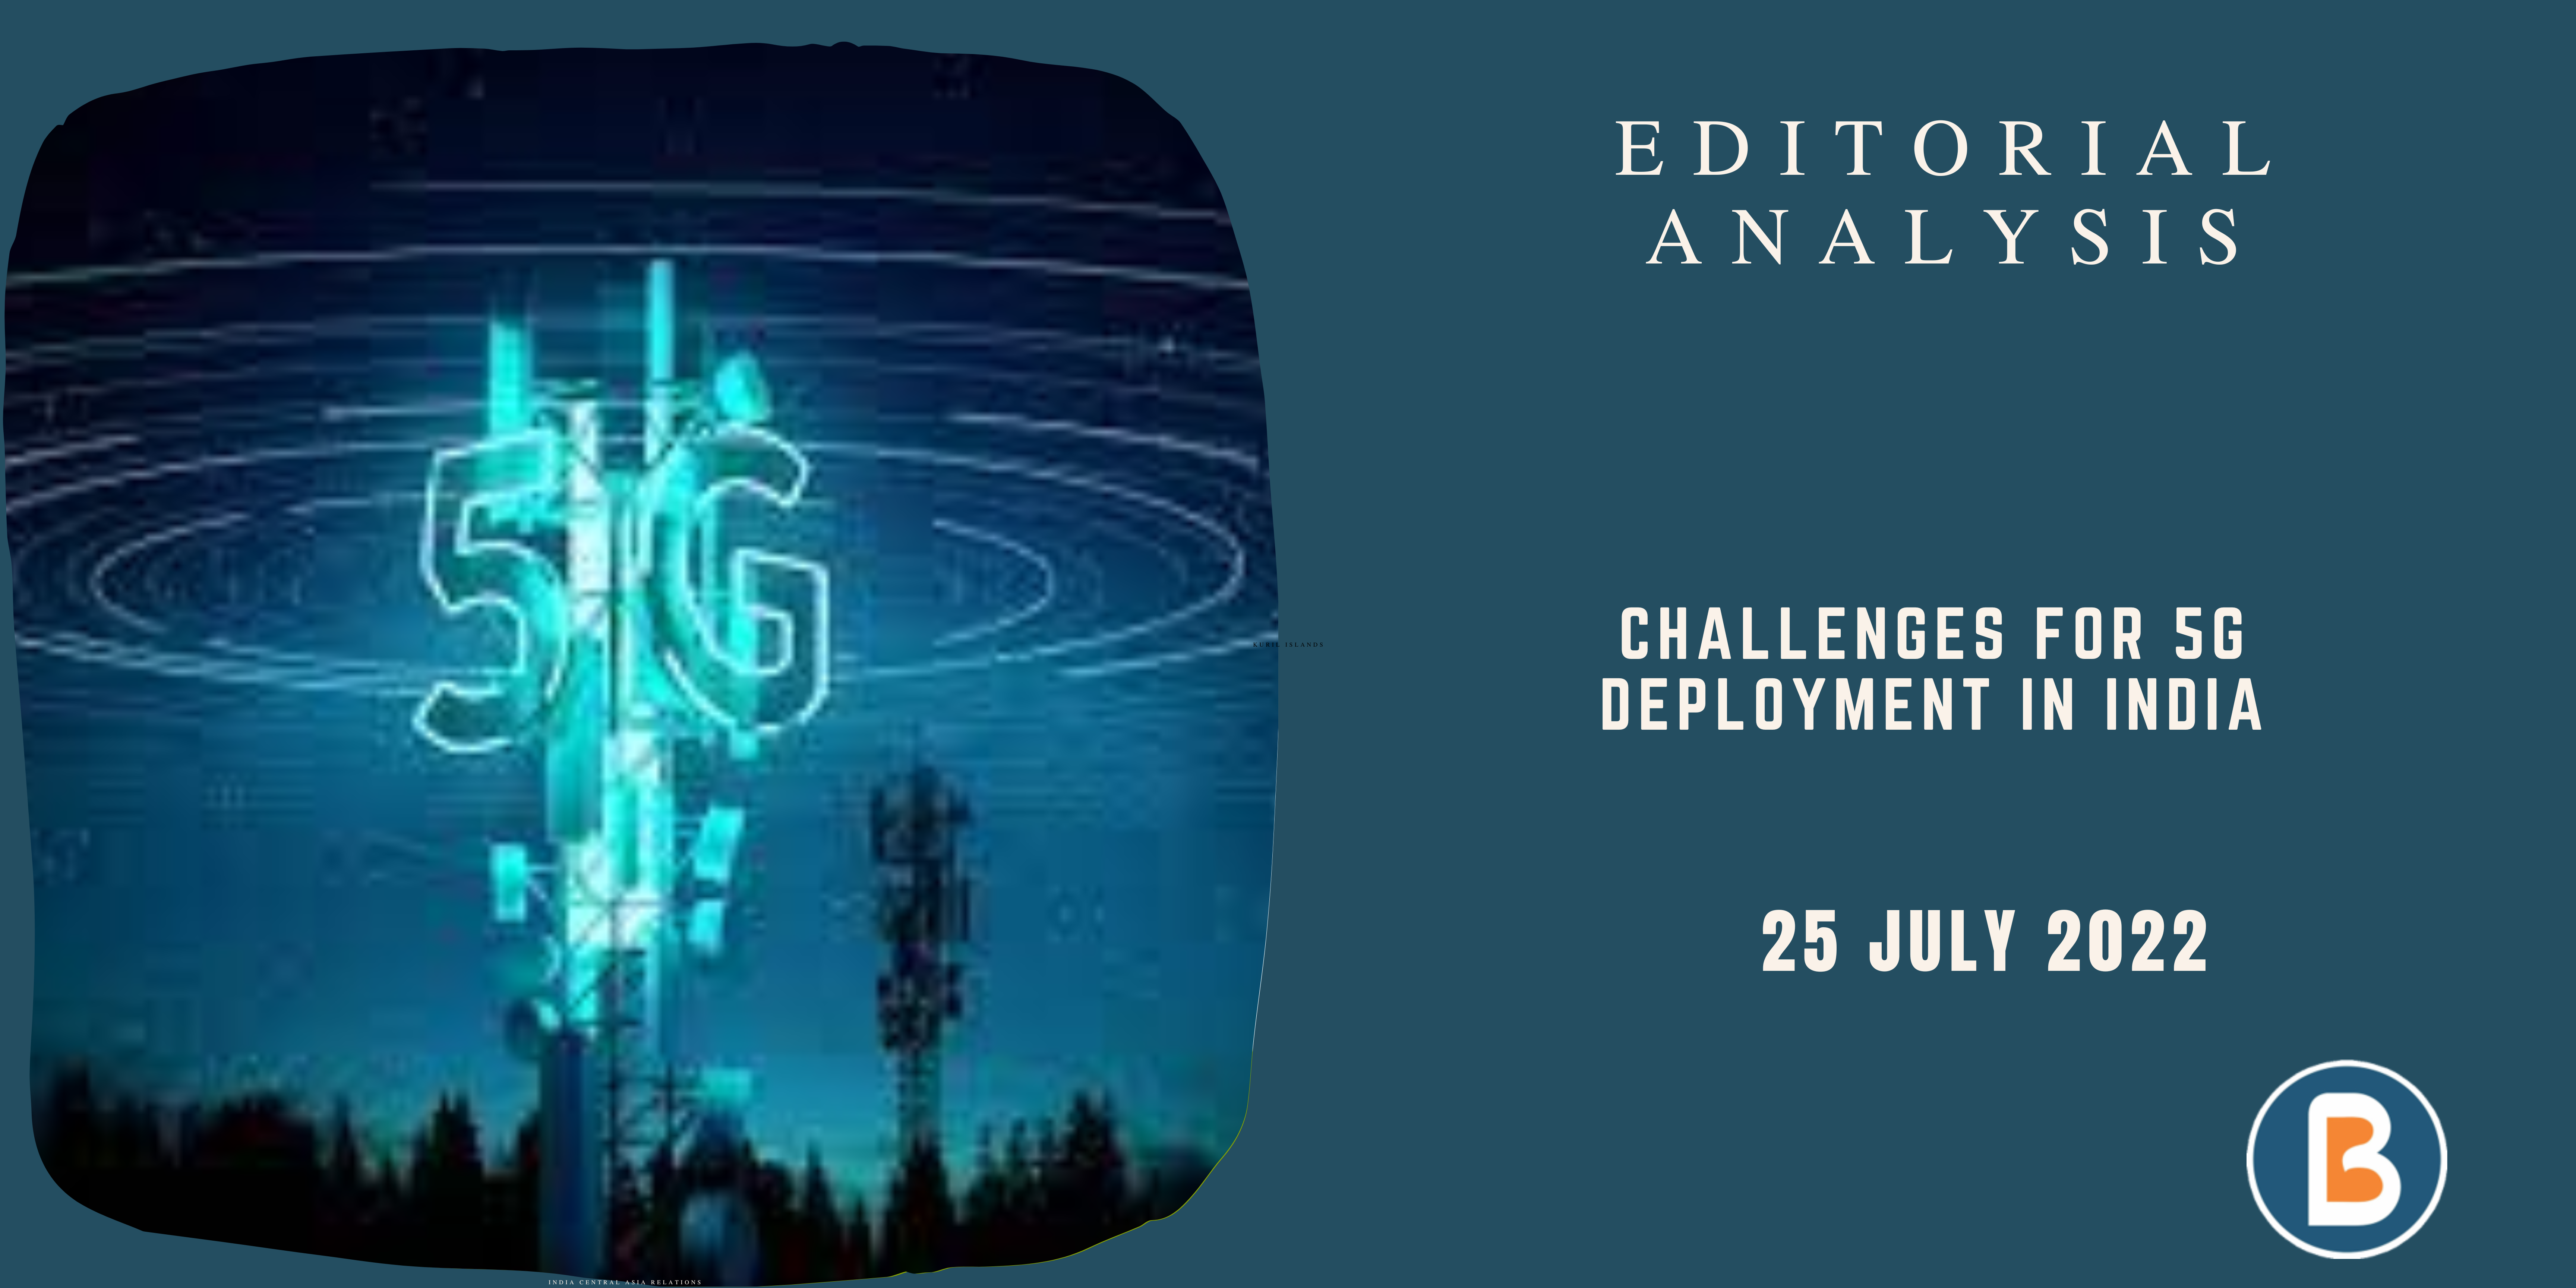 Editorial Analysis for IAS - Challenges in 5G Deployment in India